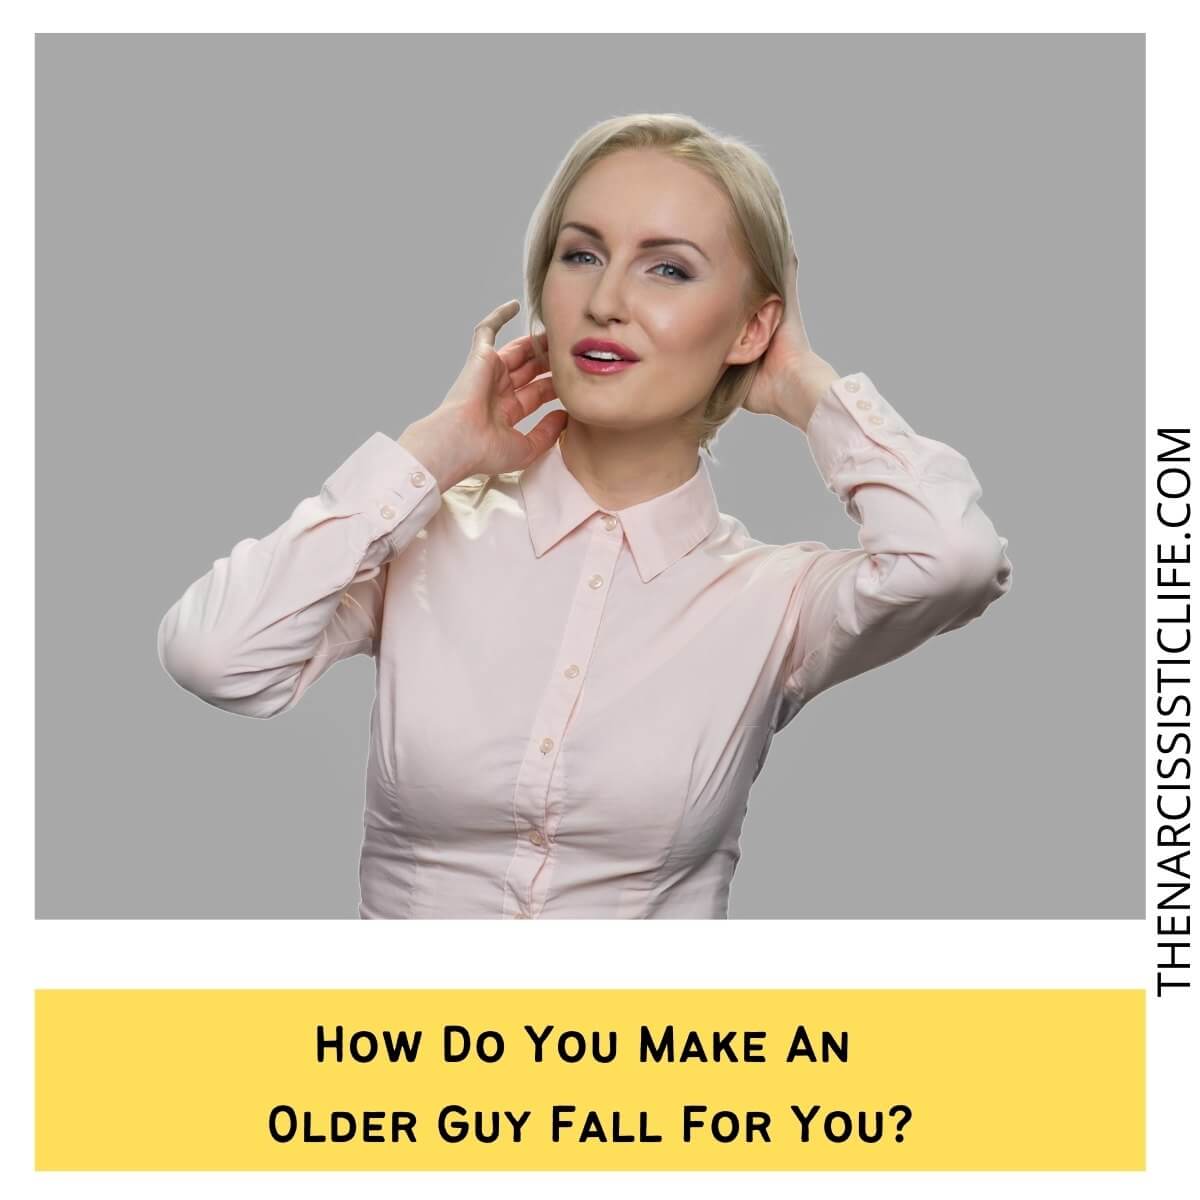 How do you tell if an older man is falling for you?